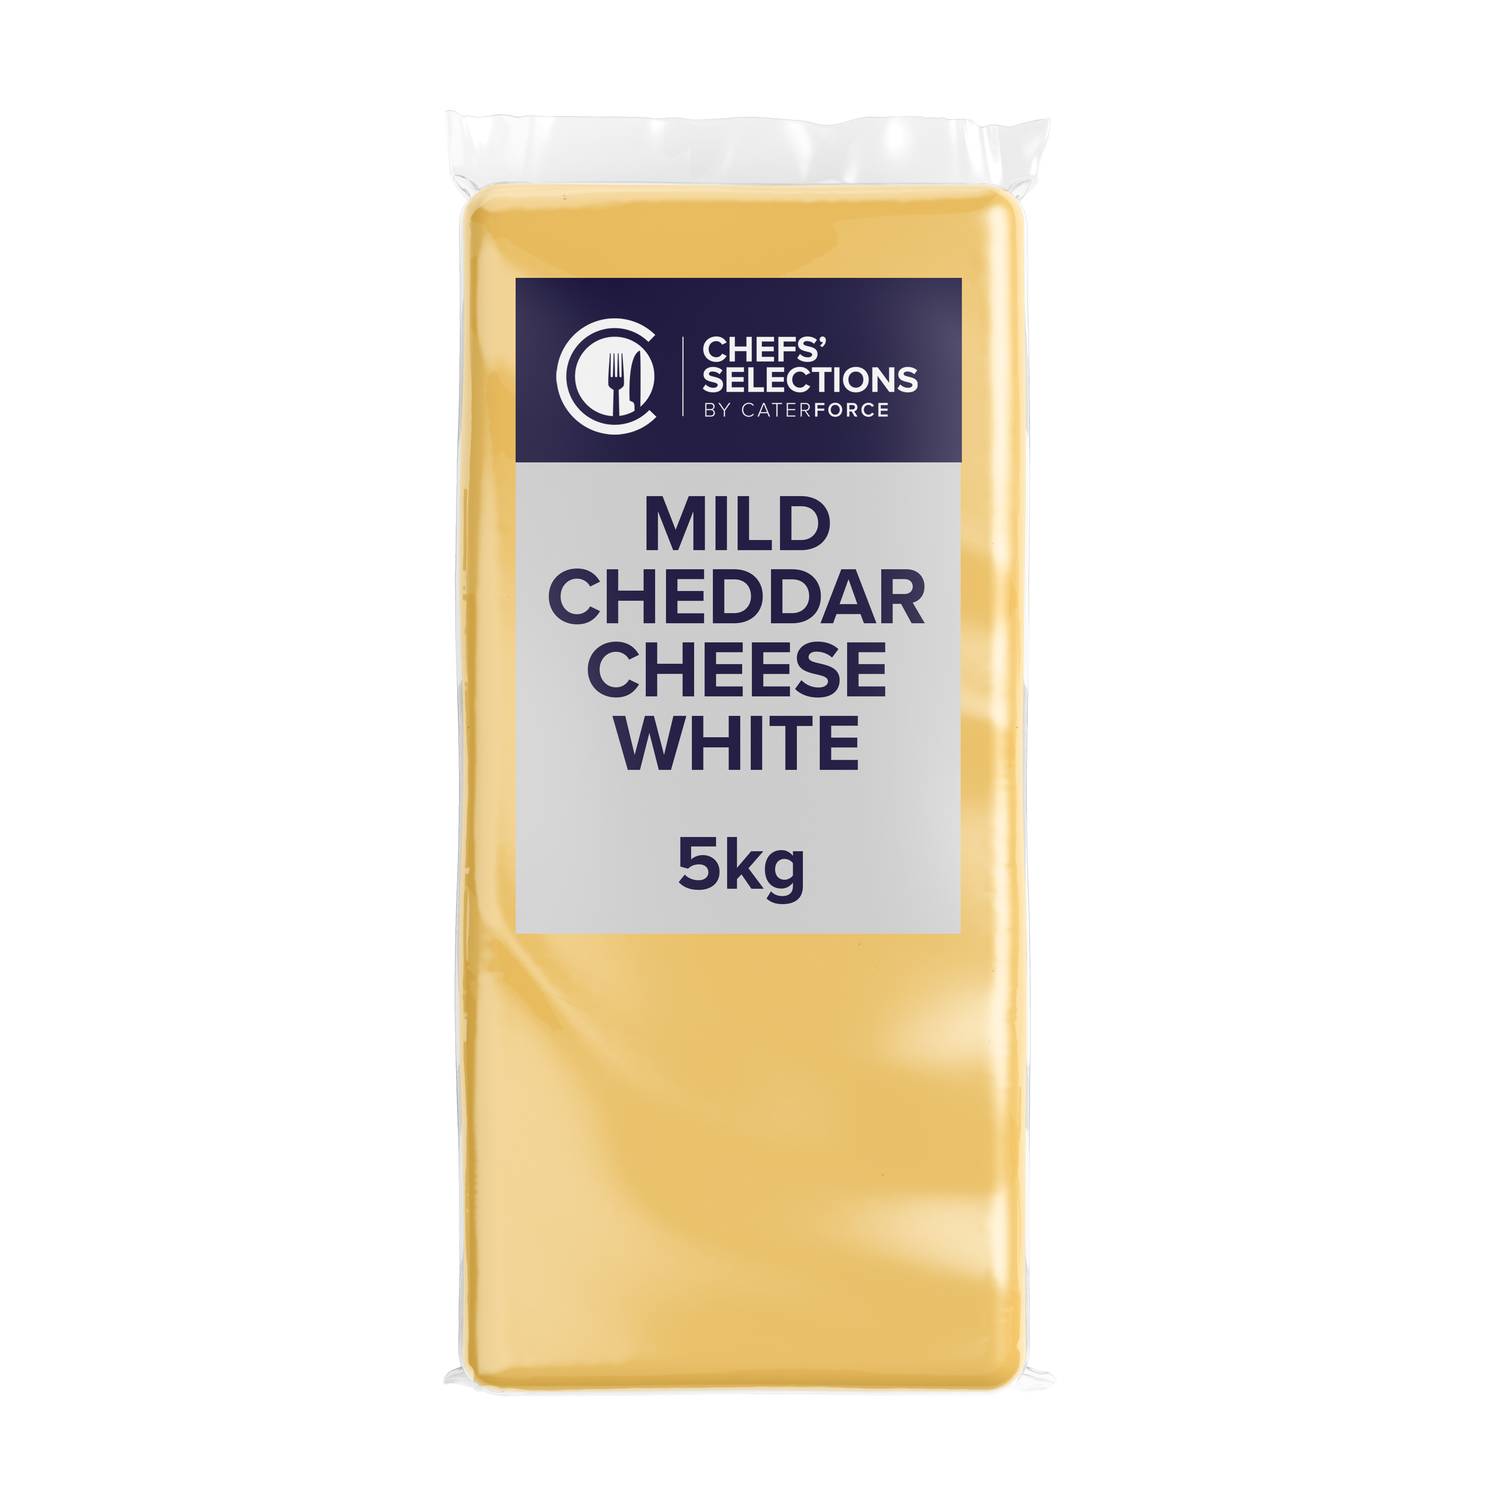 Chefs’ Selections Mild Cheddar Cheese White (4 x 5kg)